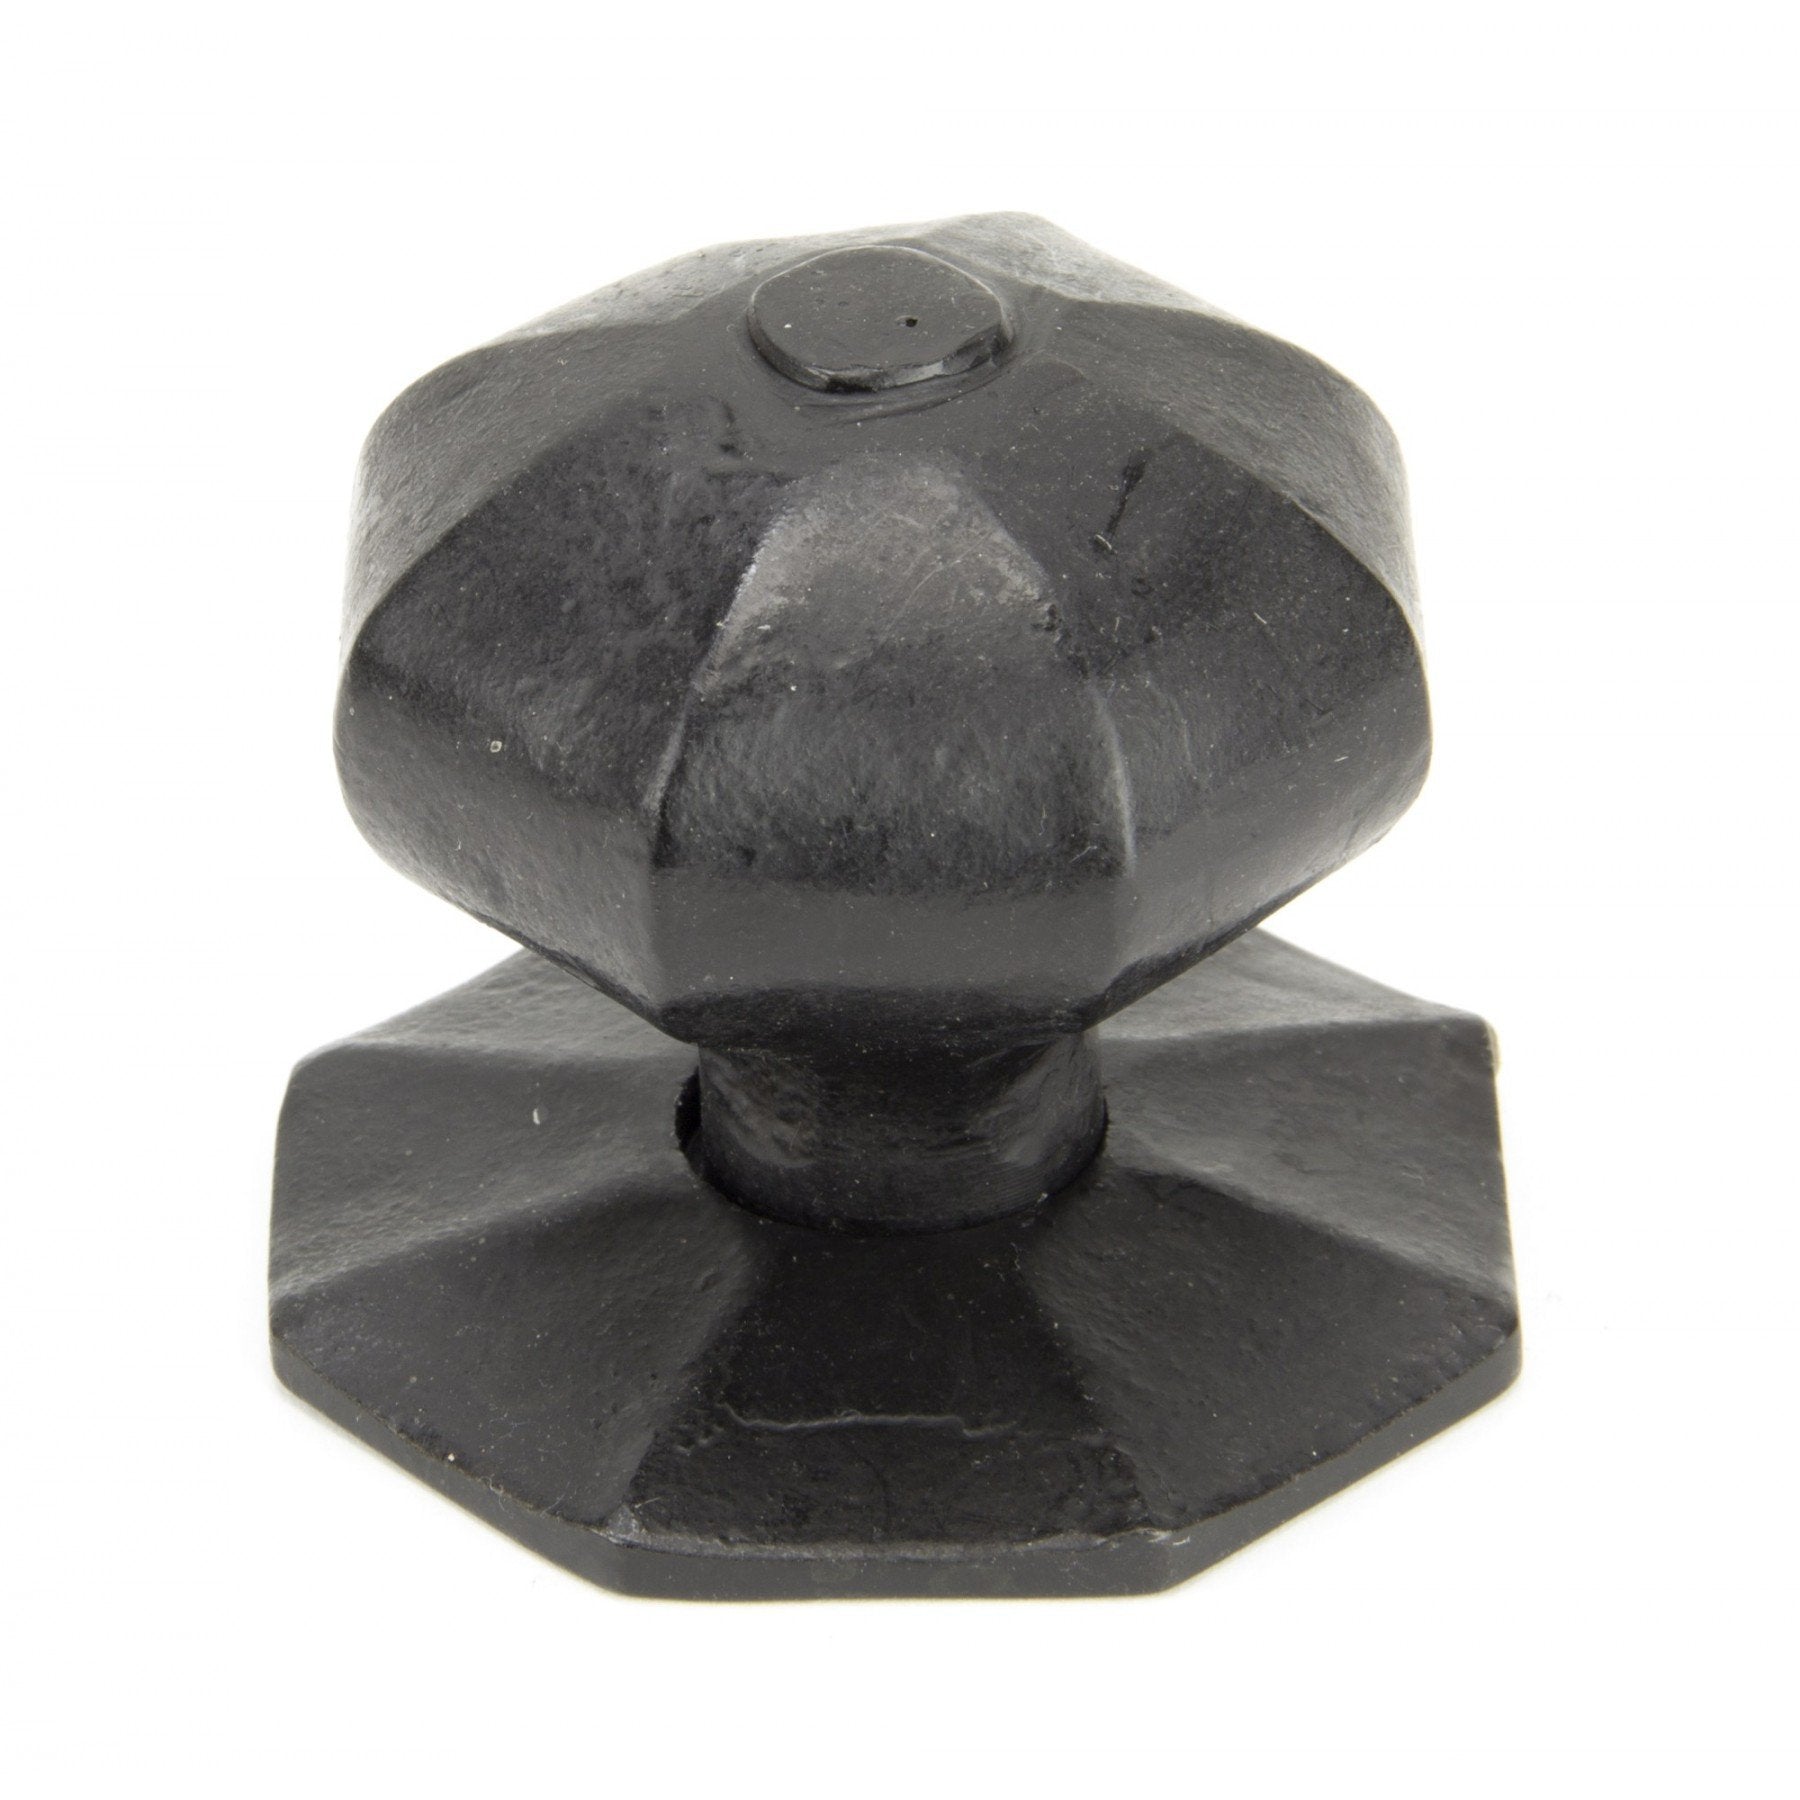 From the Anvil External Beeswax Octagonal Mortice/Rim Knob Set - Large - No.42 Interiors